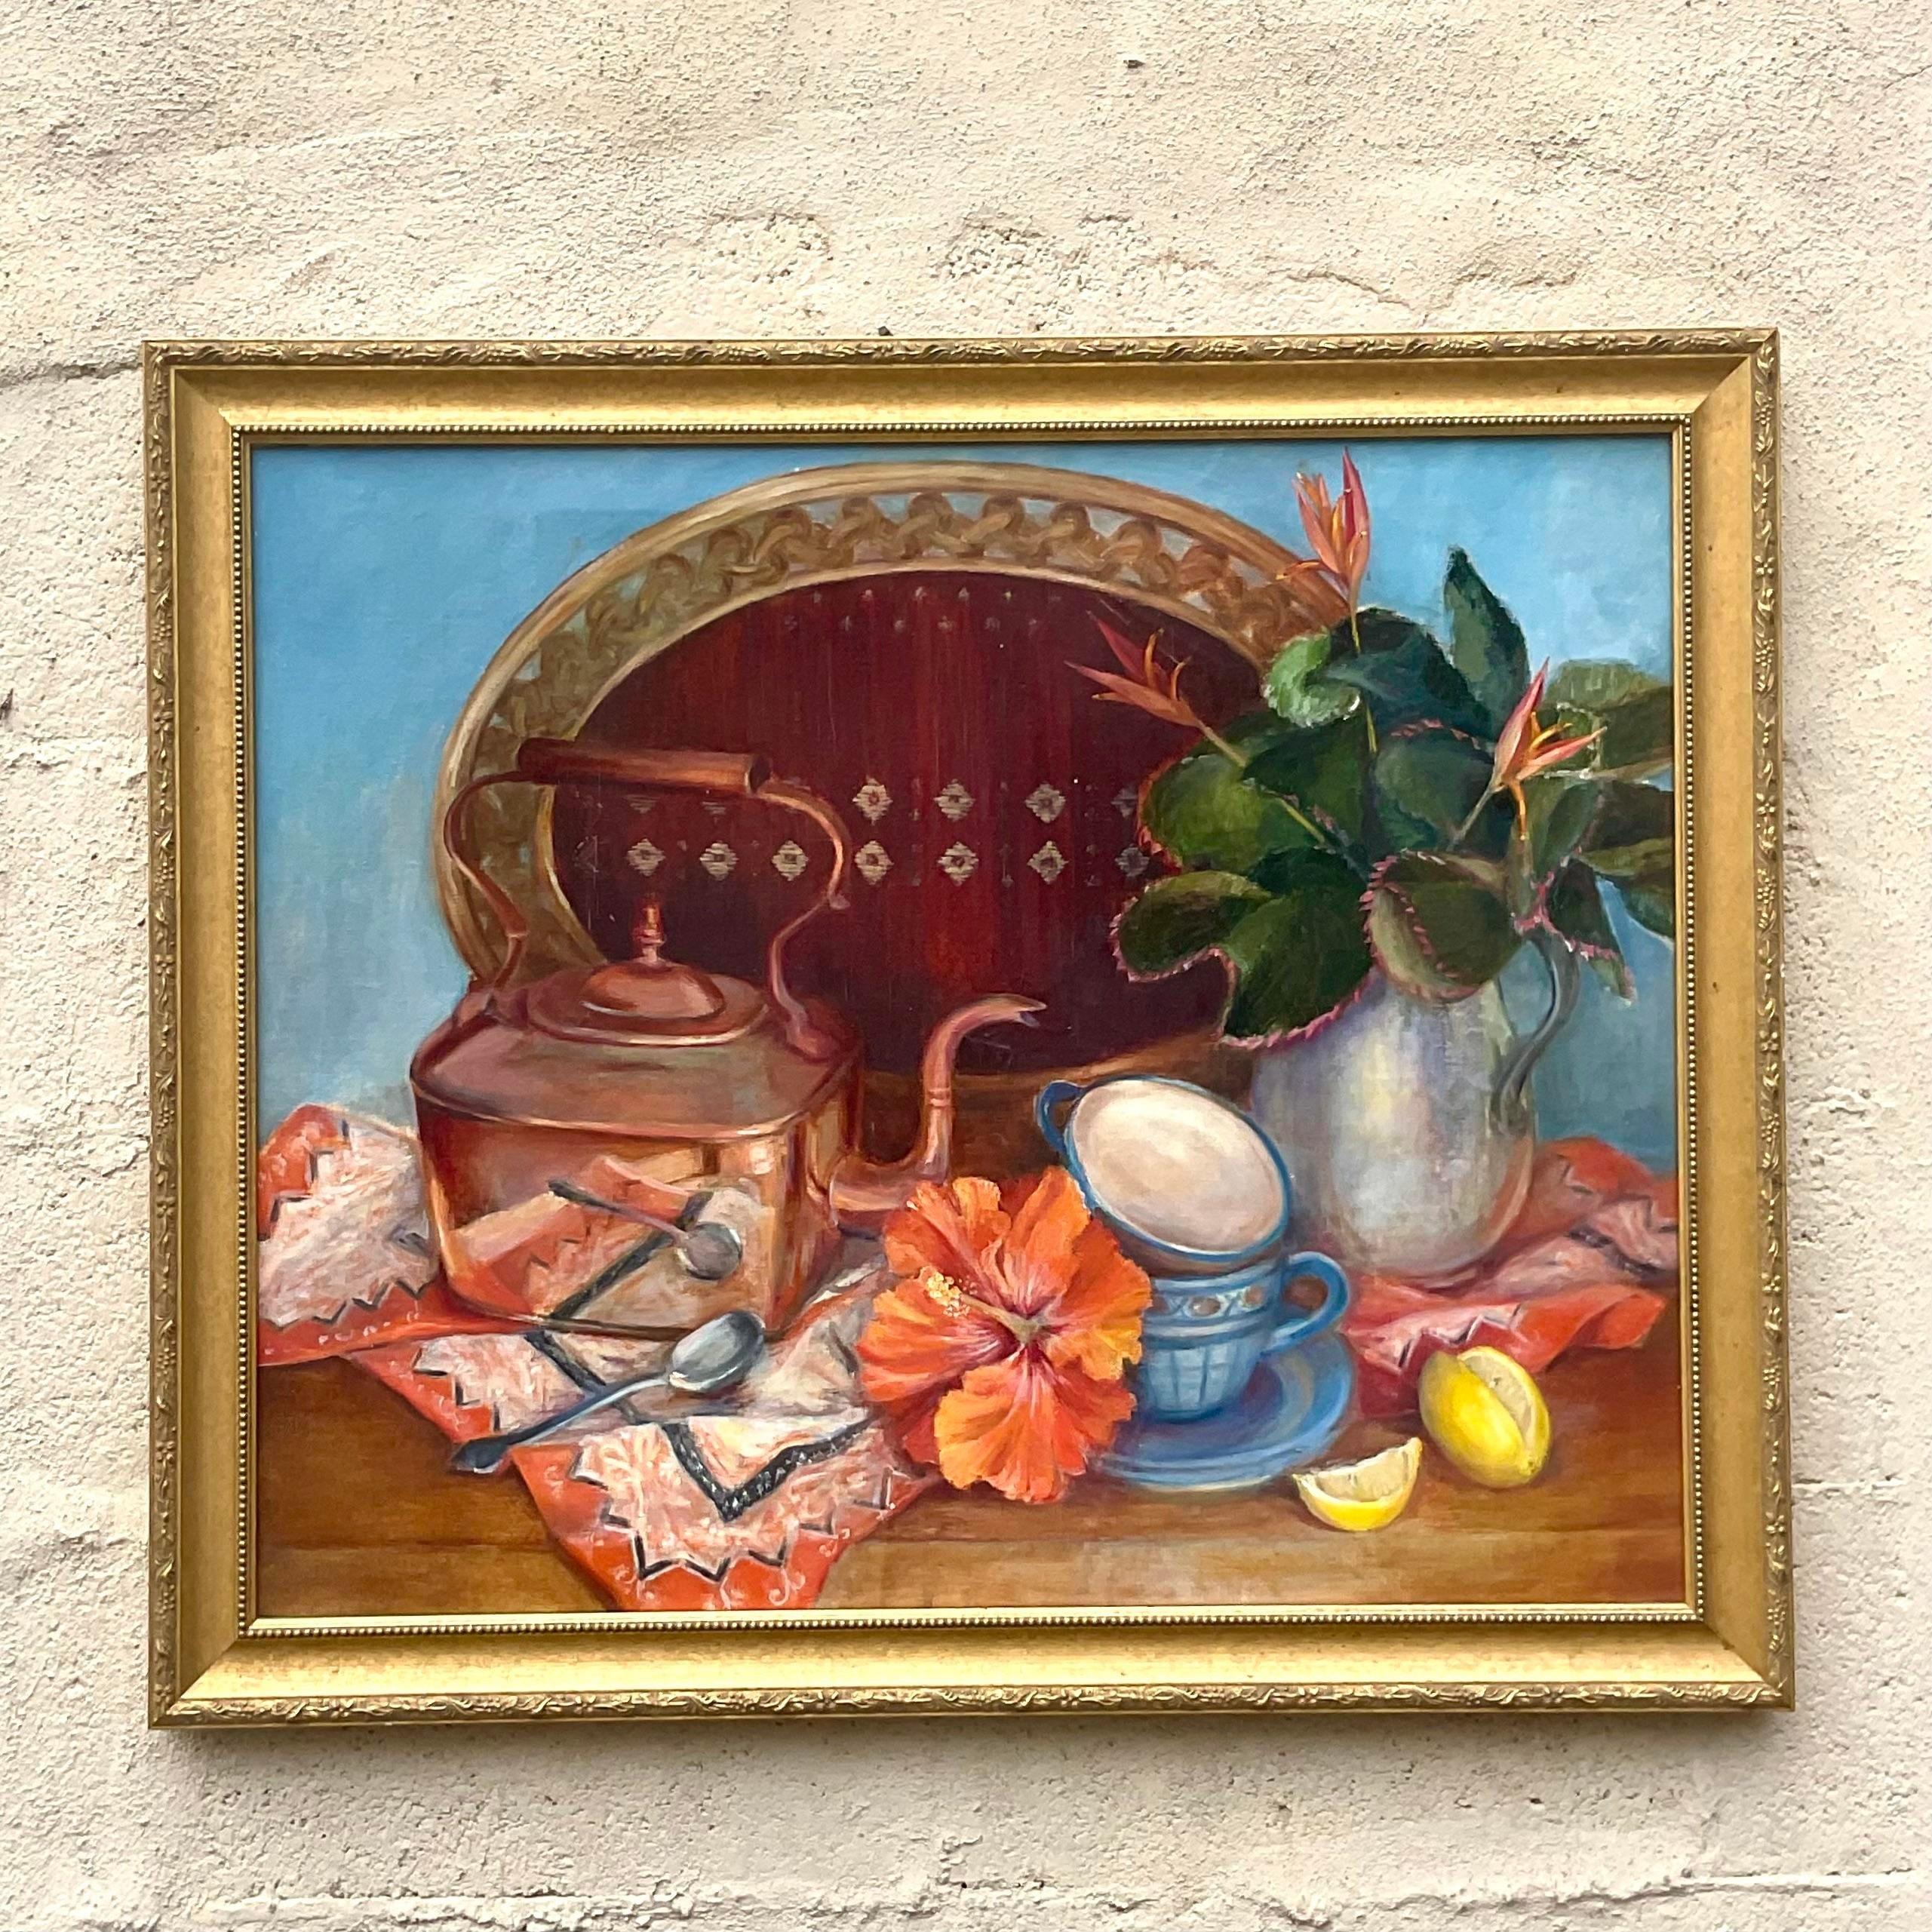 A fabulous vintage Boho original oil painting on canvas. Done by the artist Joan Rice Farish Quillen. An exceptional tabletop still life with beautiful rich colors. Acquired from an RI estate.